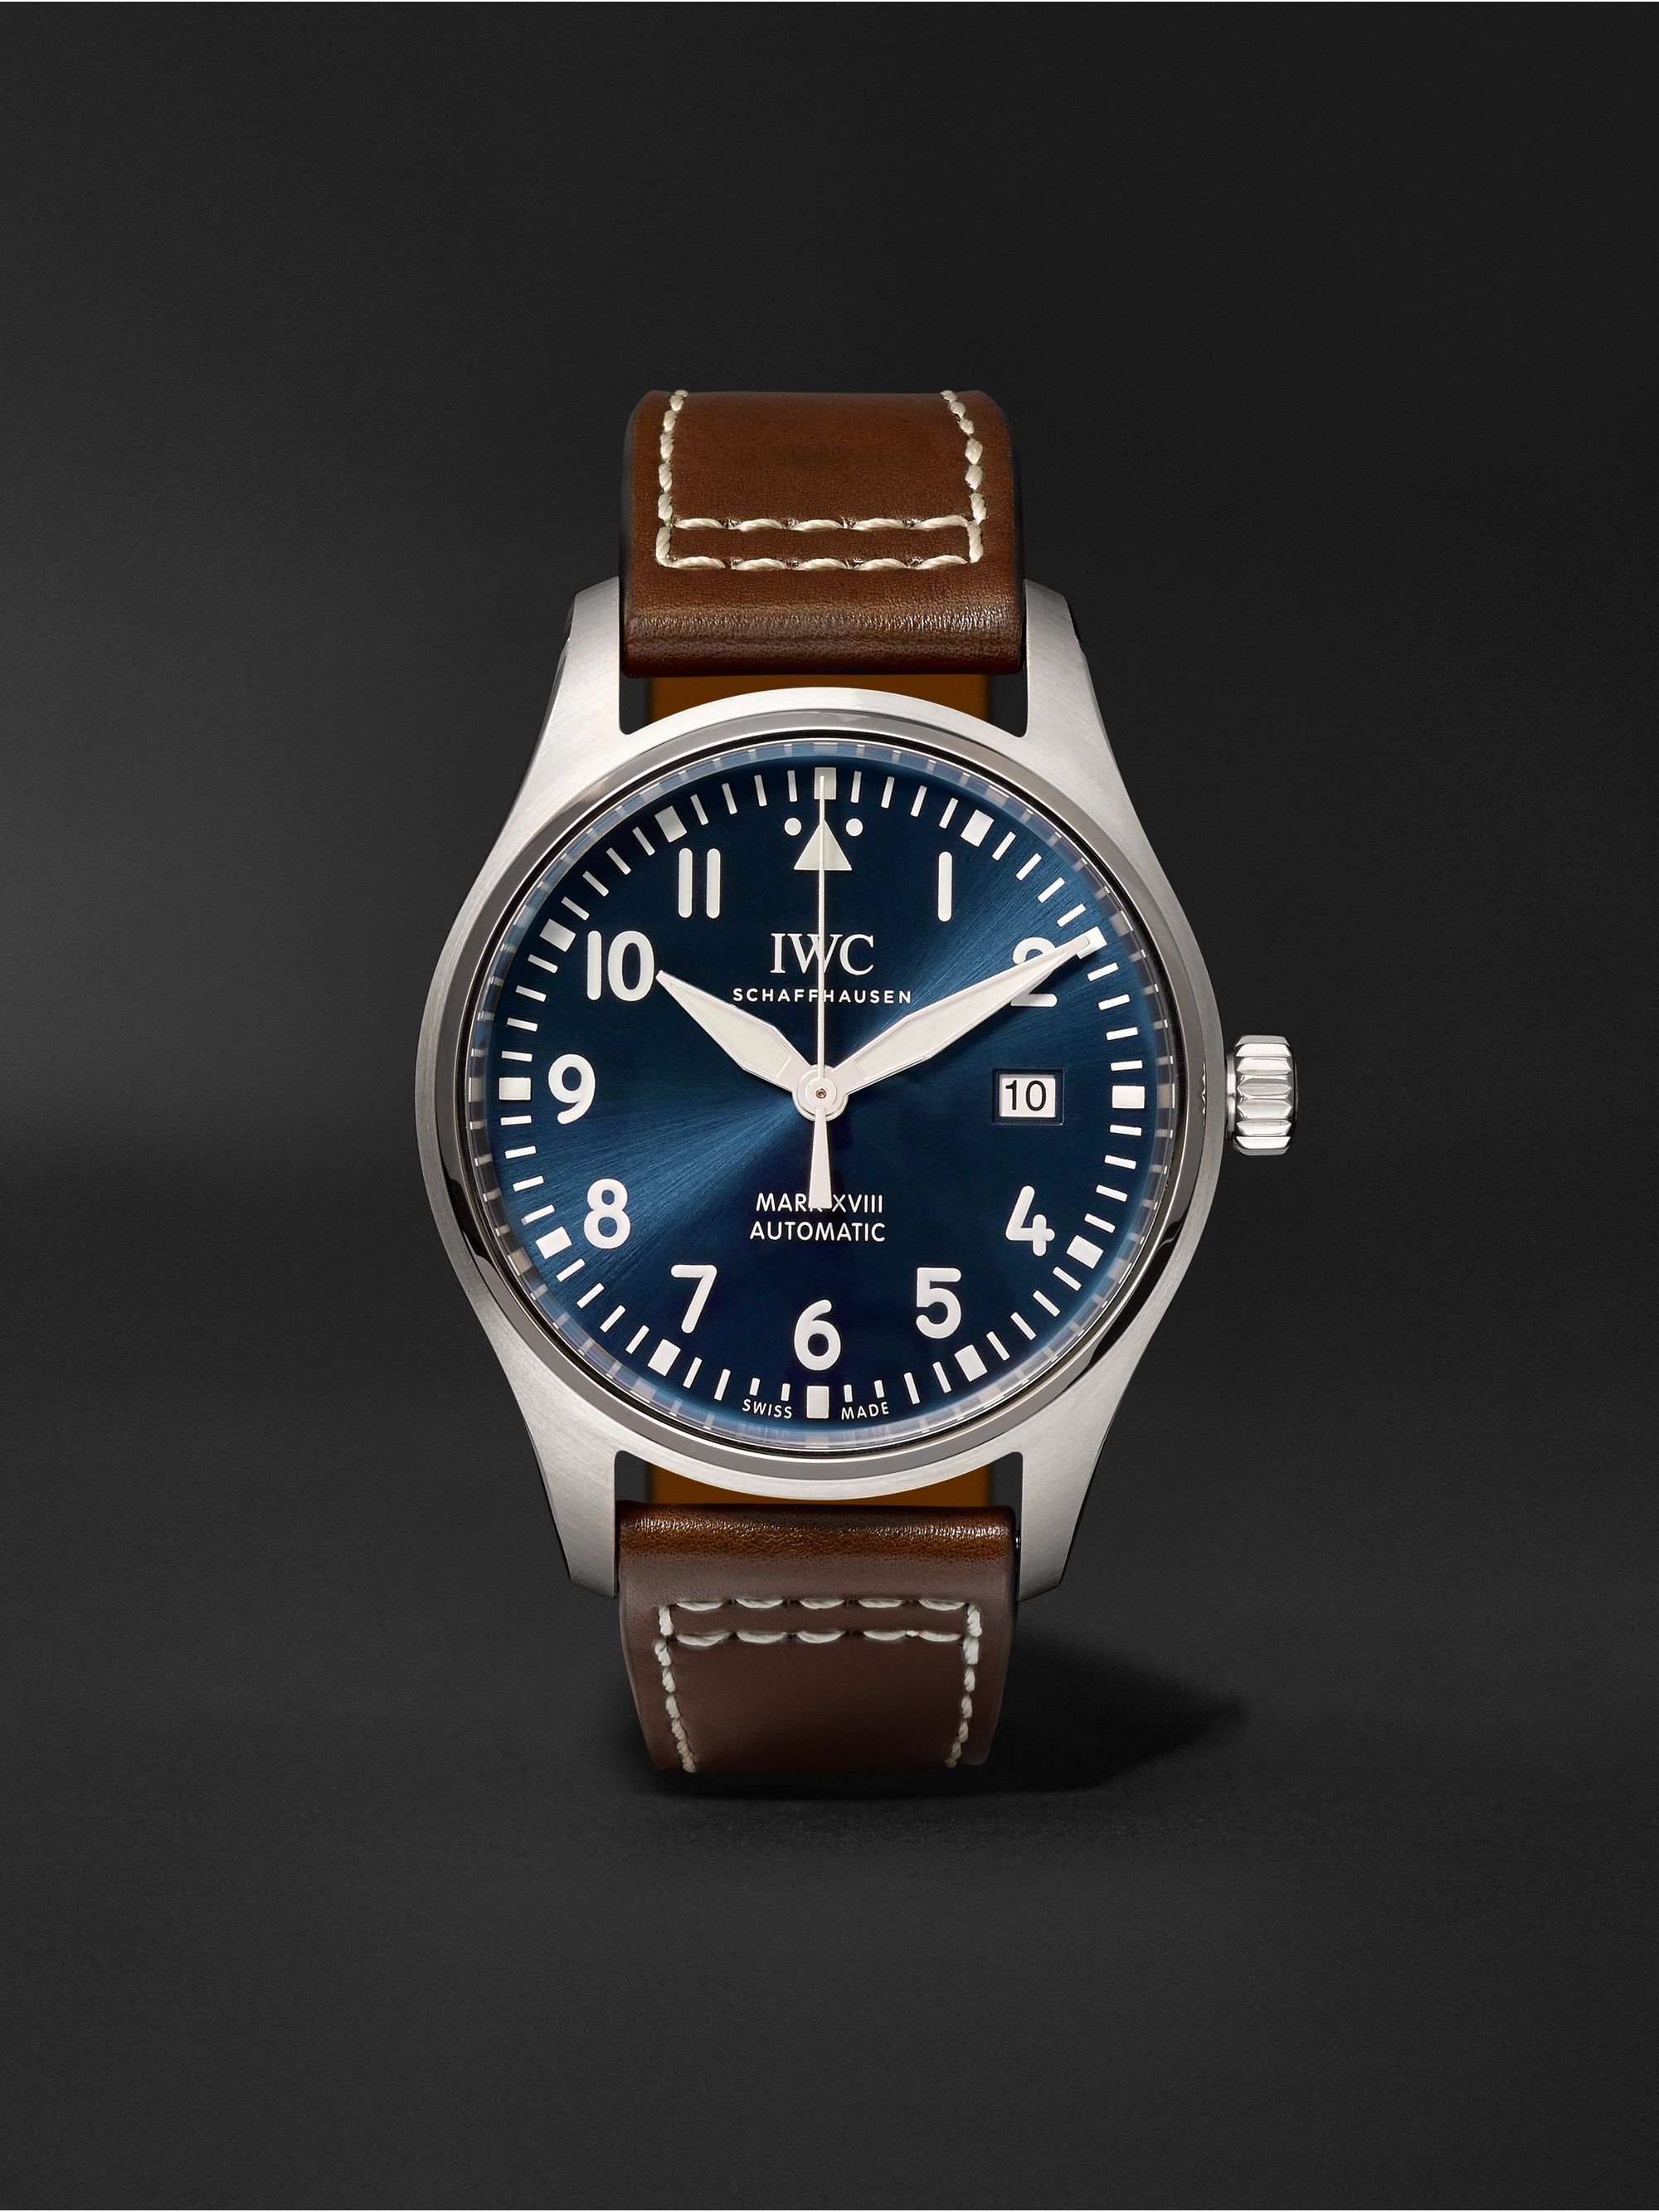 IWC SCHAFFHAUSEN Pilot's Mark XVIII Le Petit Prince Edition Automatic 40mm Stainless Steel and Textile Watch, Ref. No. IW327004